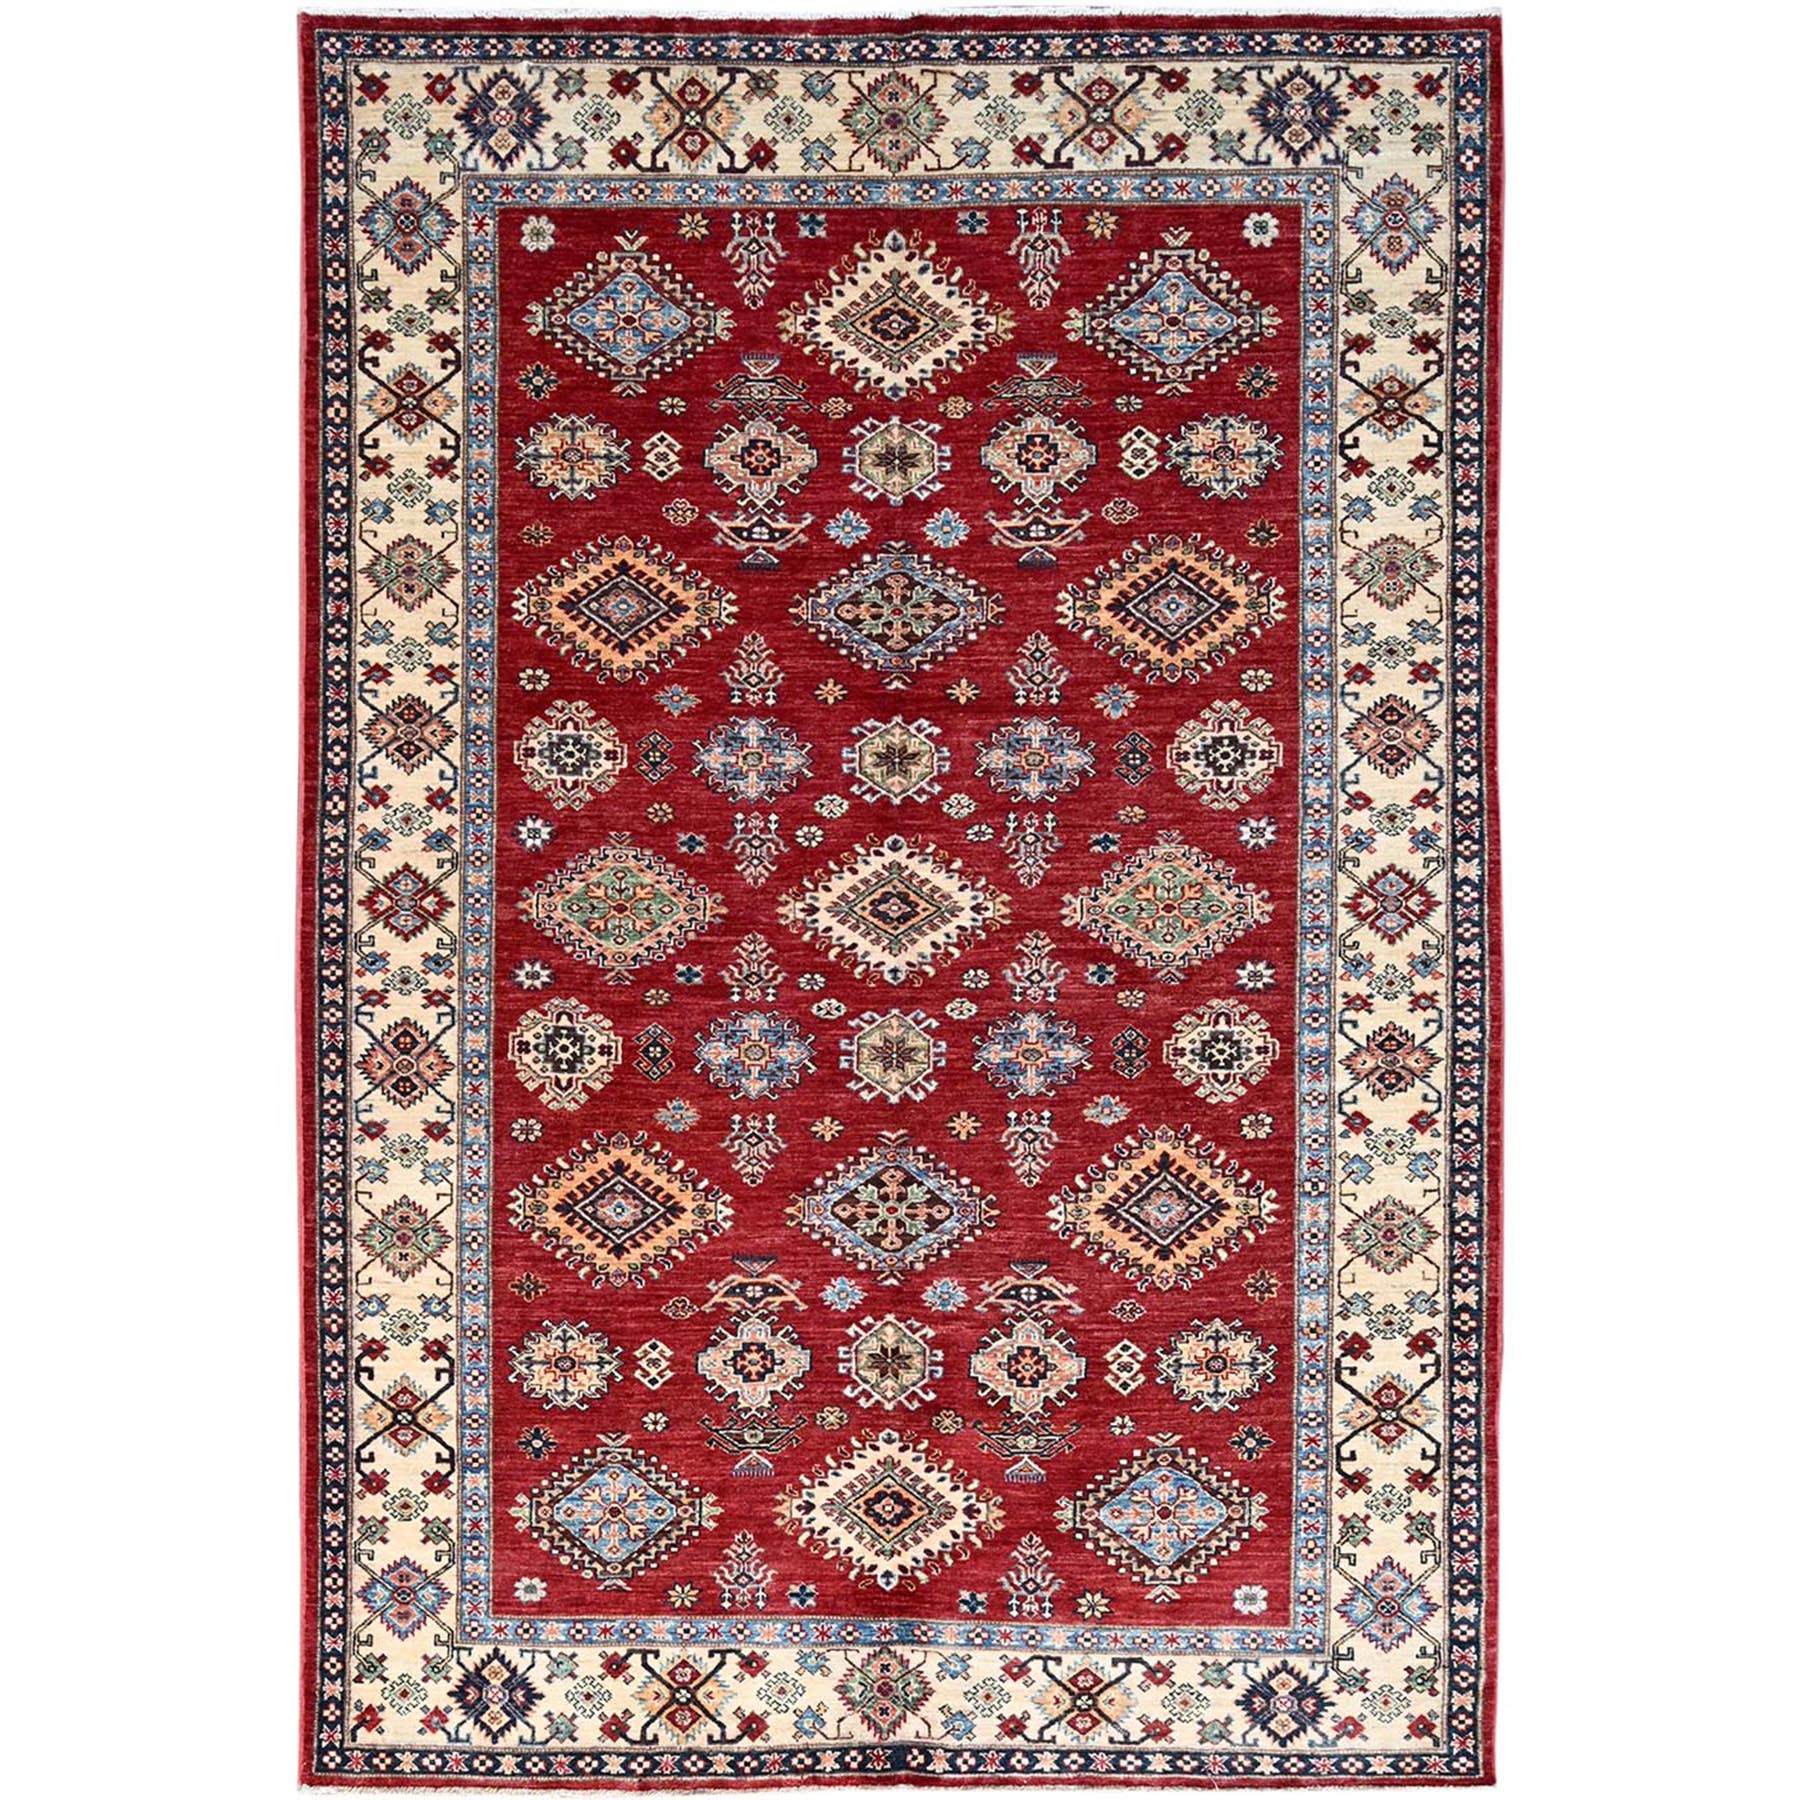 Fire Brick Red, Afghan Tribal Super Kazak With All Over Medallions, Natural Dyes, Soft and Velvety Pure Wool, Hand Knotted, Oriental Rug 